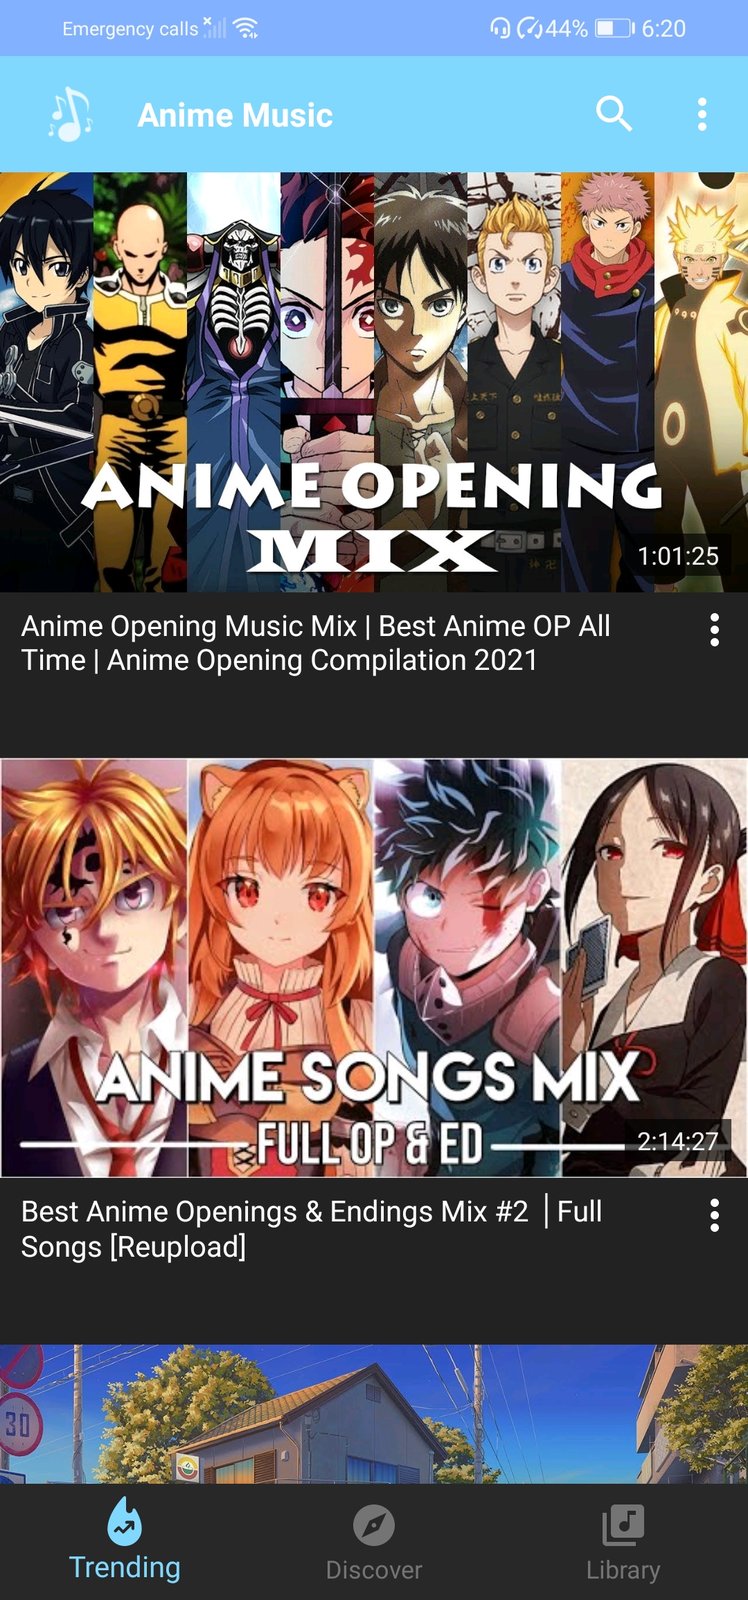 Anime Openings Music Mix #2, Best Anime OP All Time